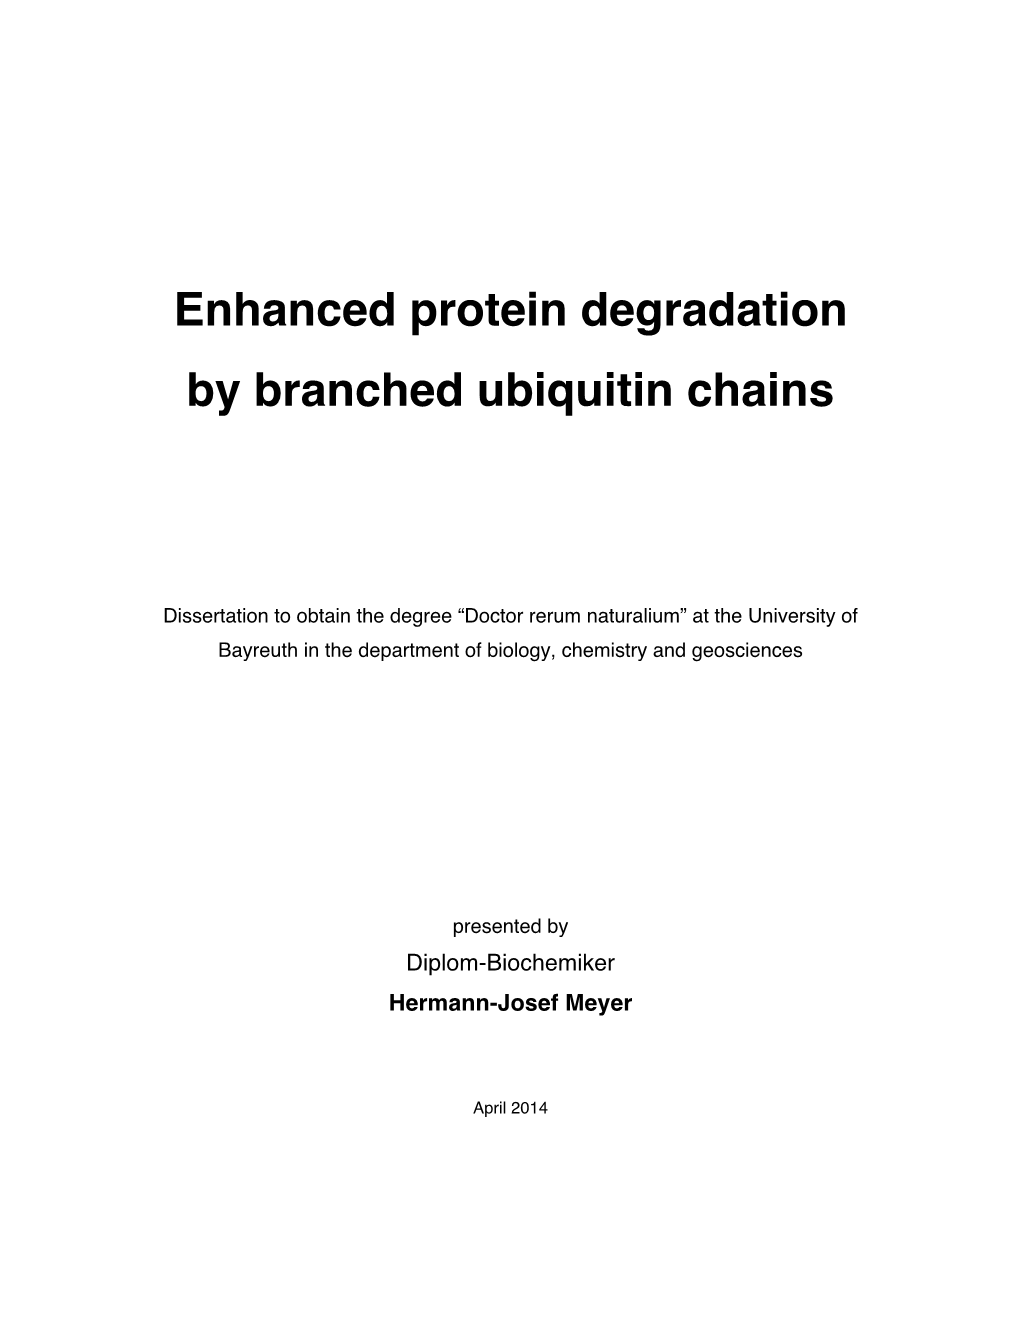 Enhanced Protein Degradation by Branched Ubiquitin Chains